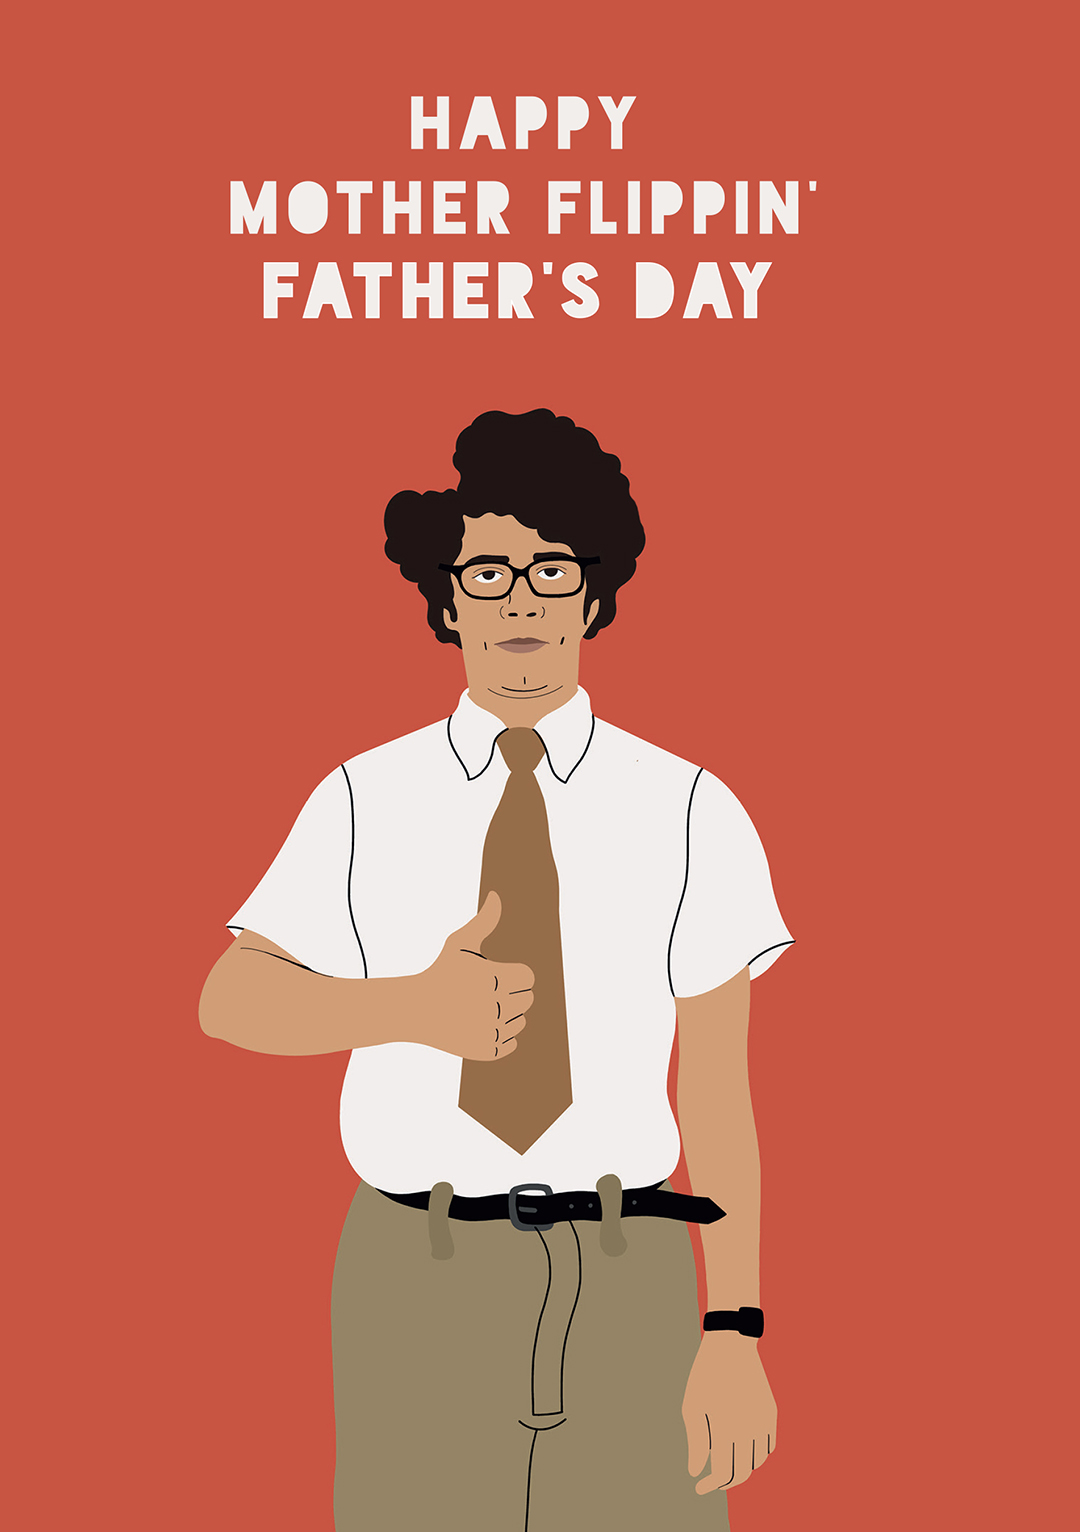 Happy Mother Flippin' Father's Day - Greeting Card